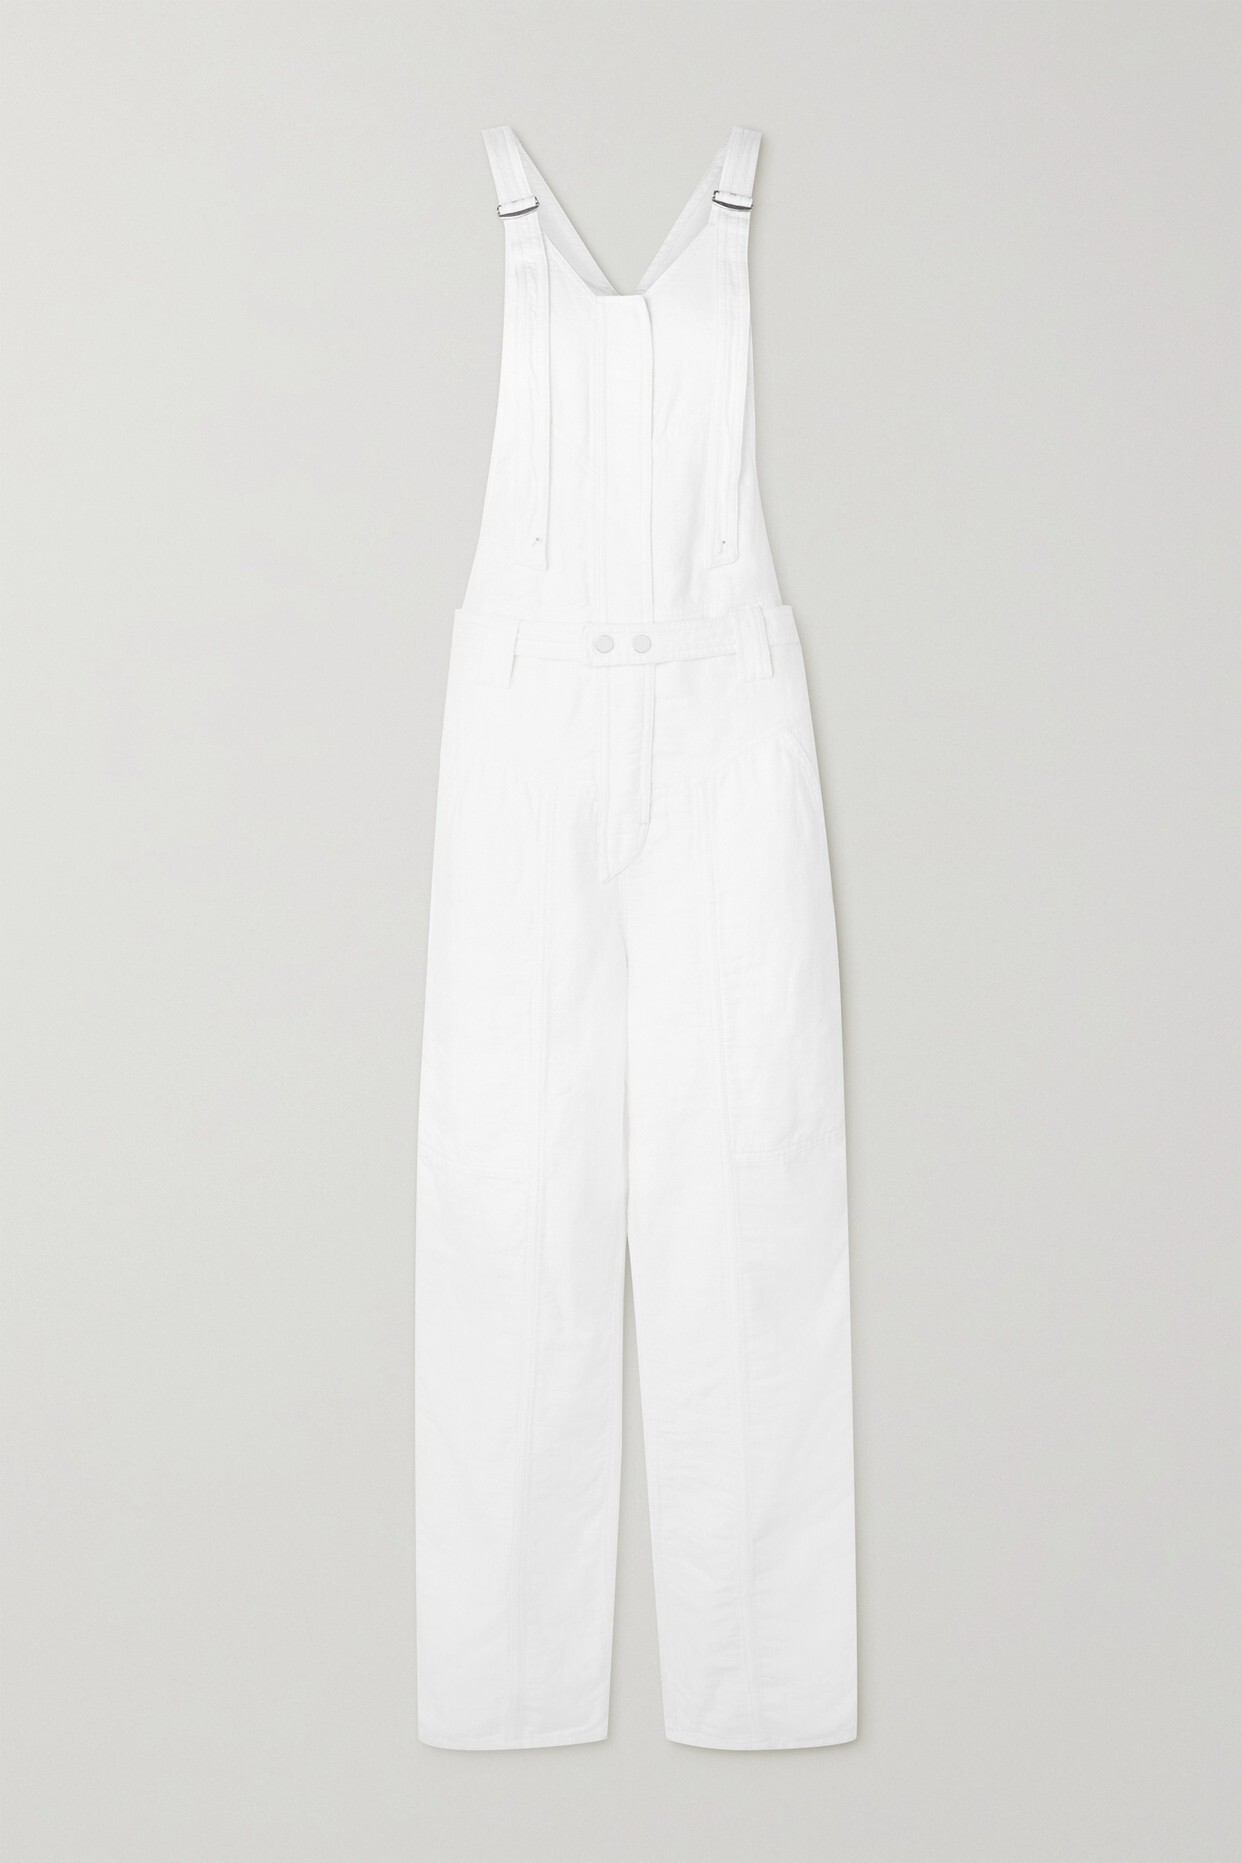 Isabel Marant - Keisha Belted Cotton And Linen-blend Jumpsuit - White